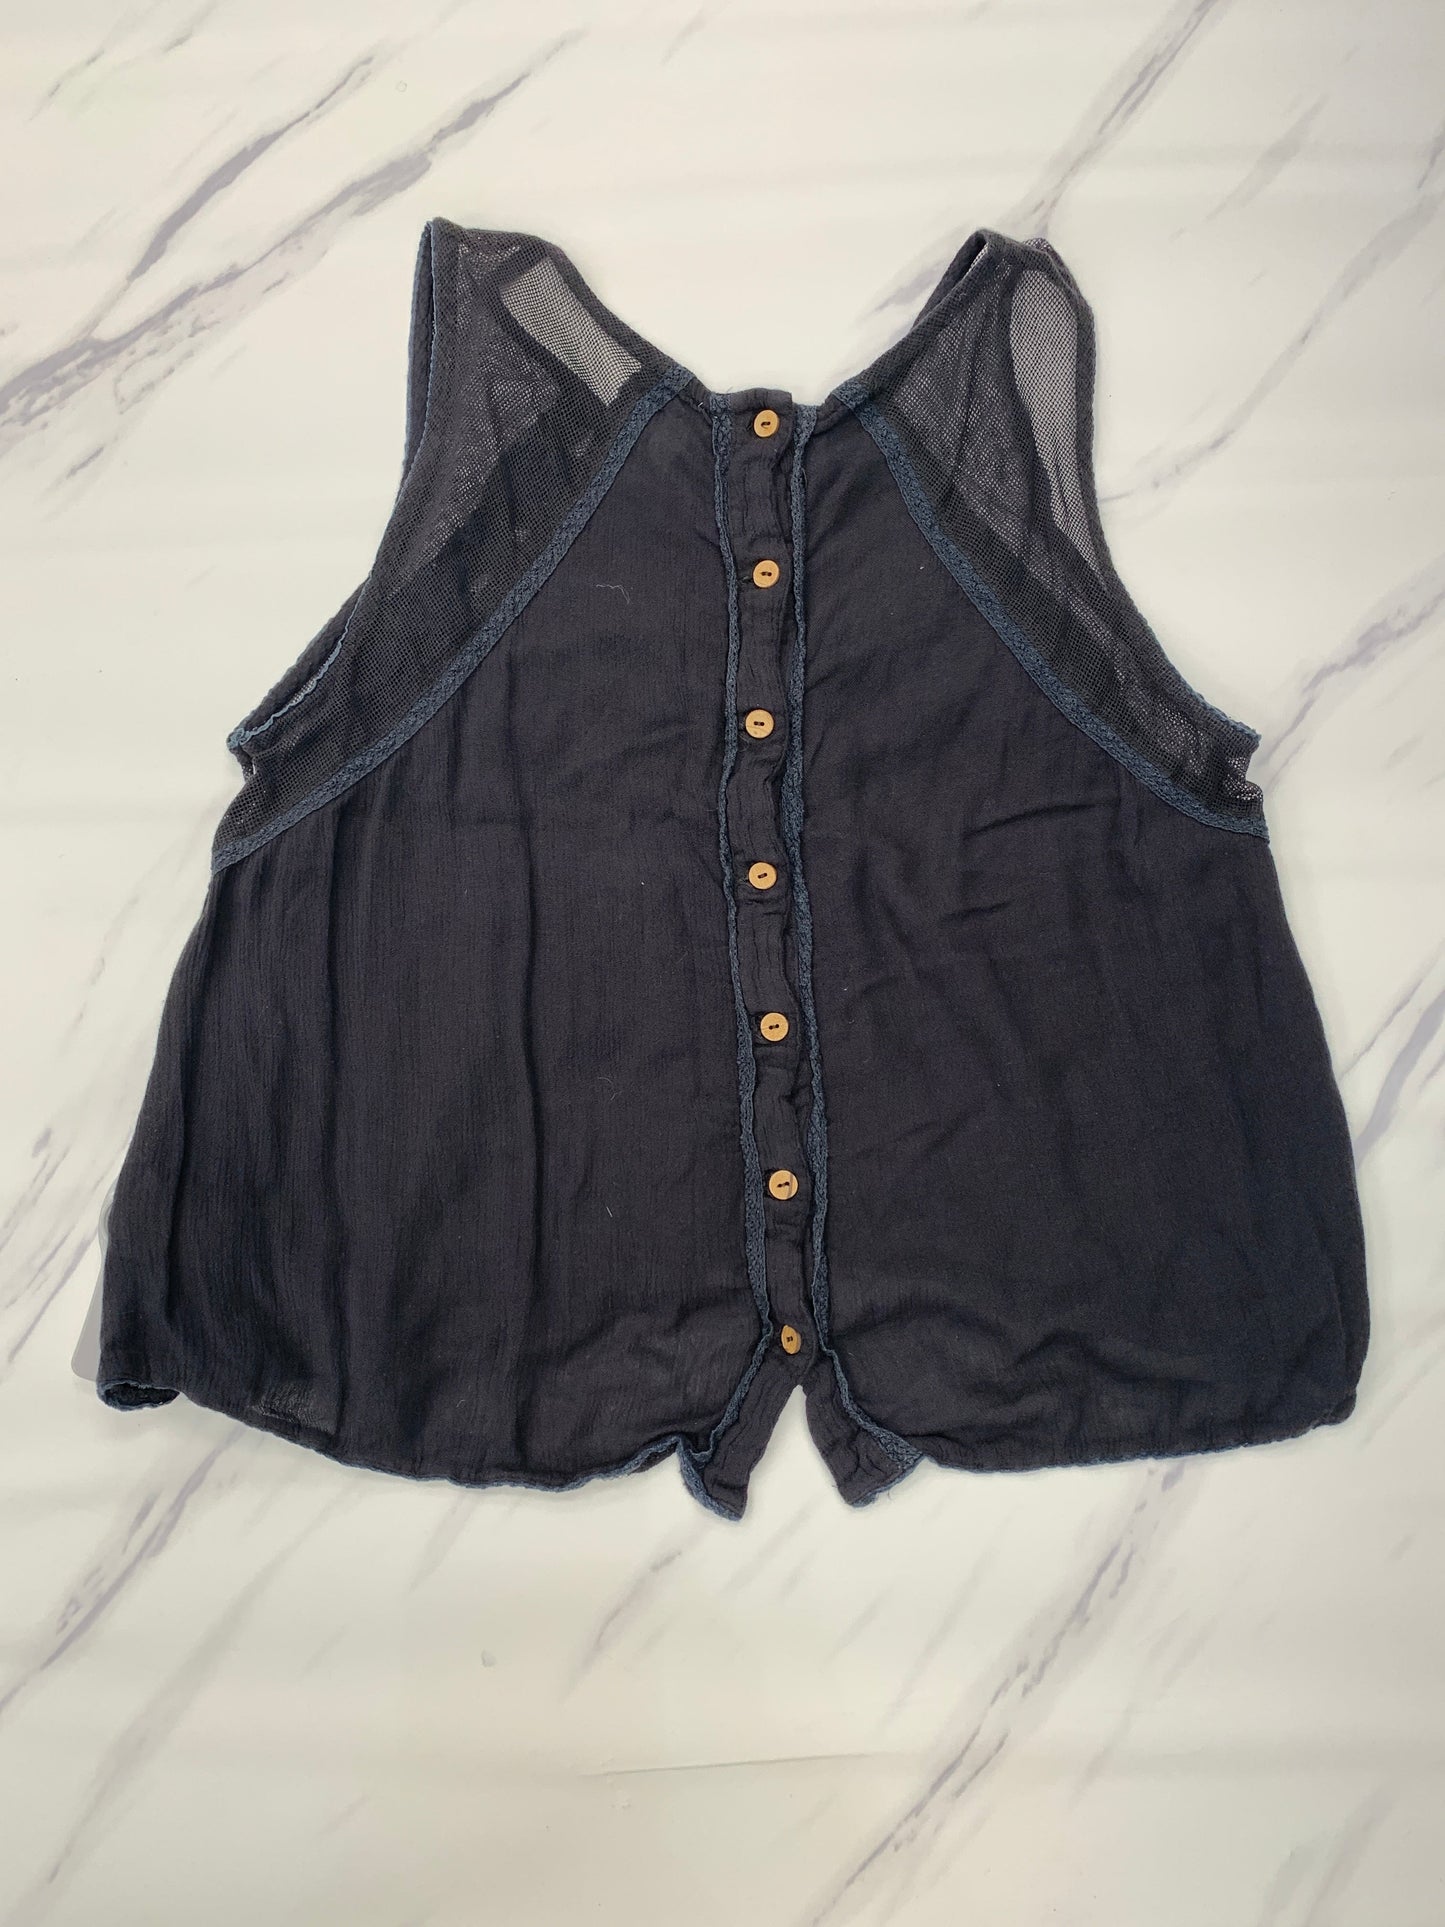 Top Sleeveless Free People, Size S